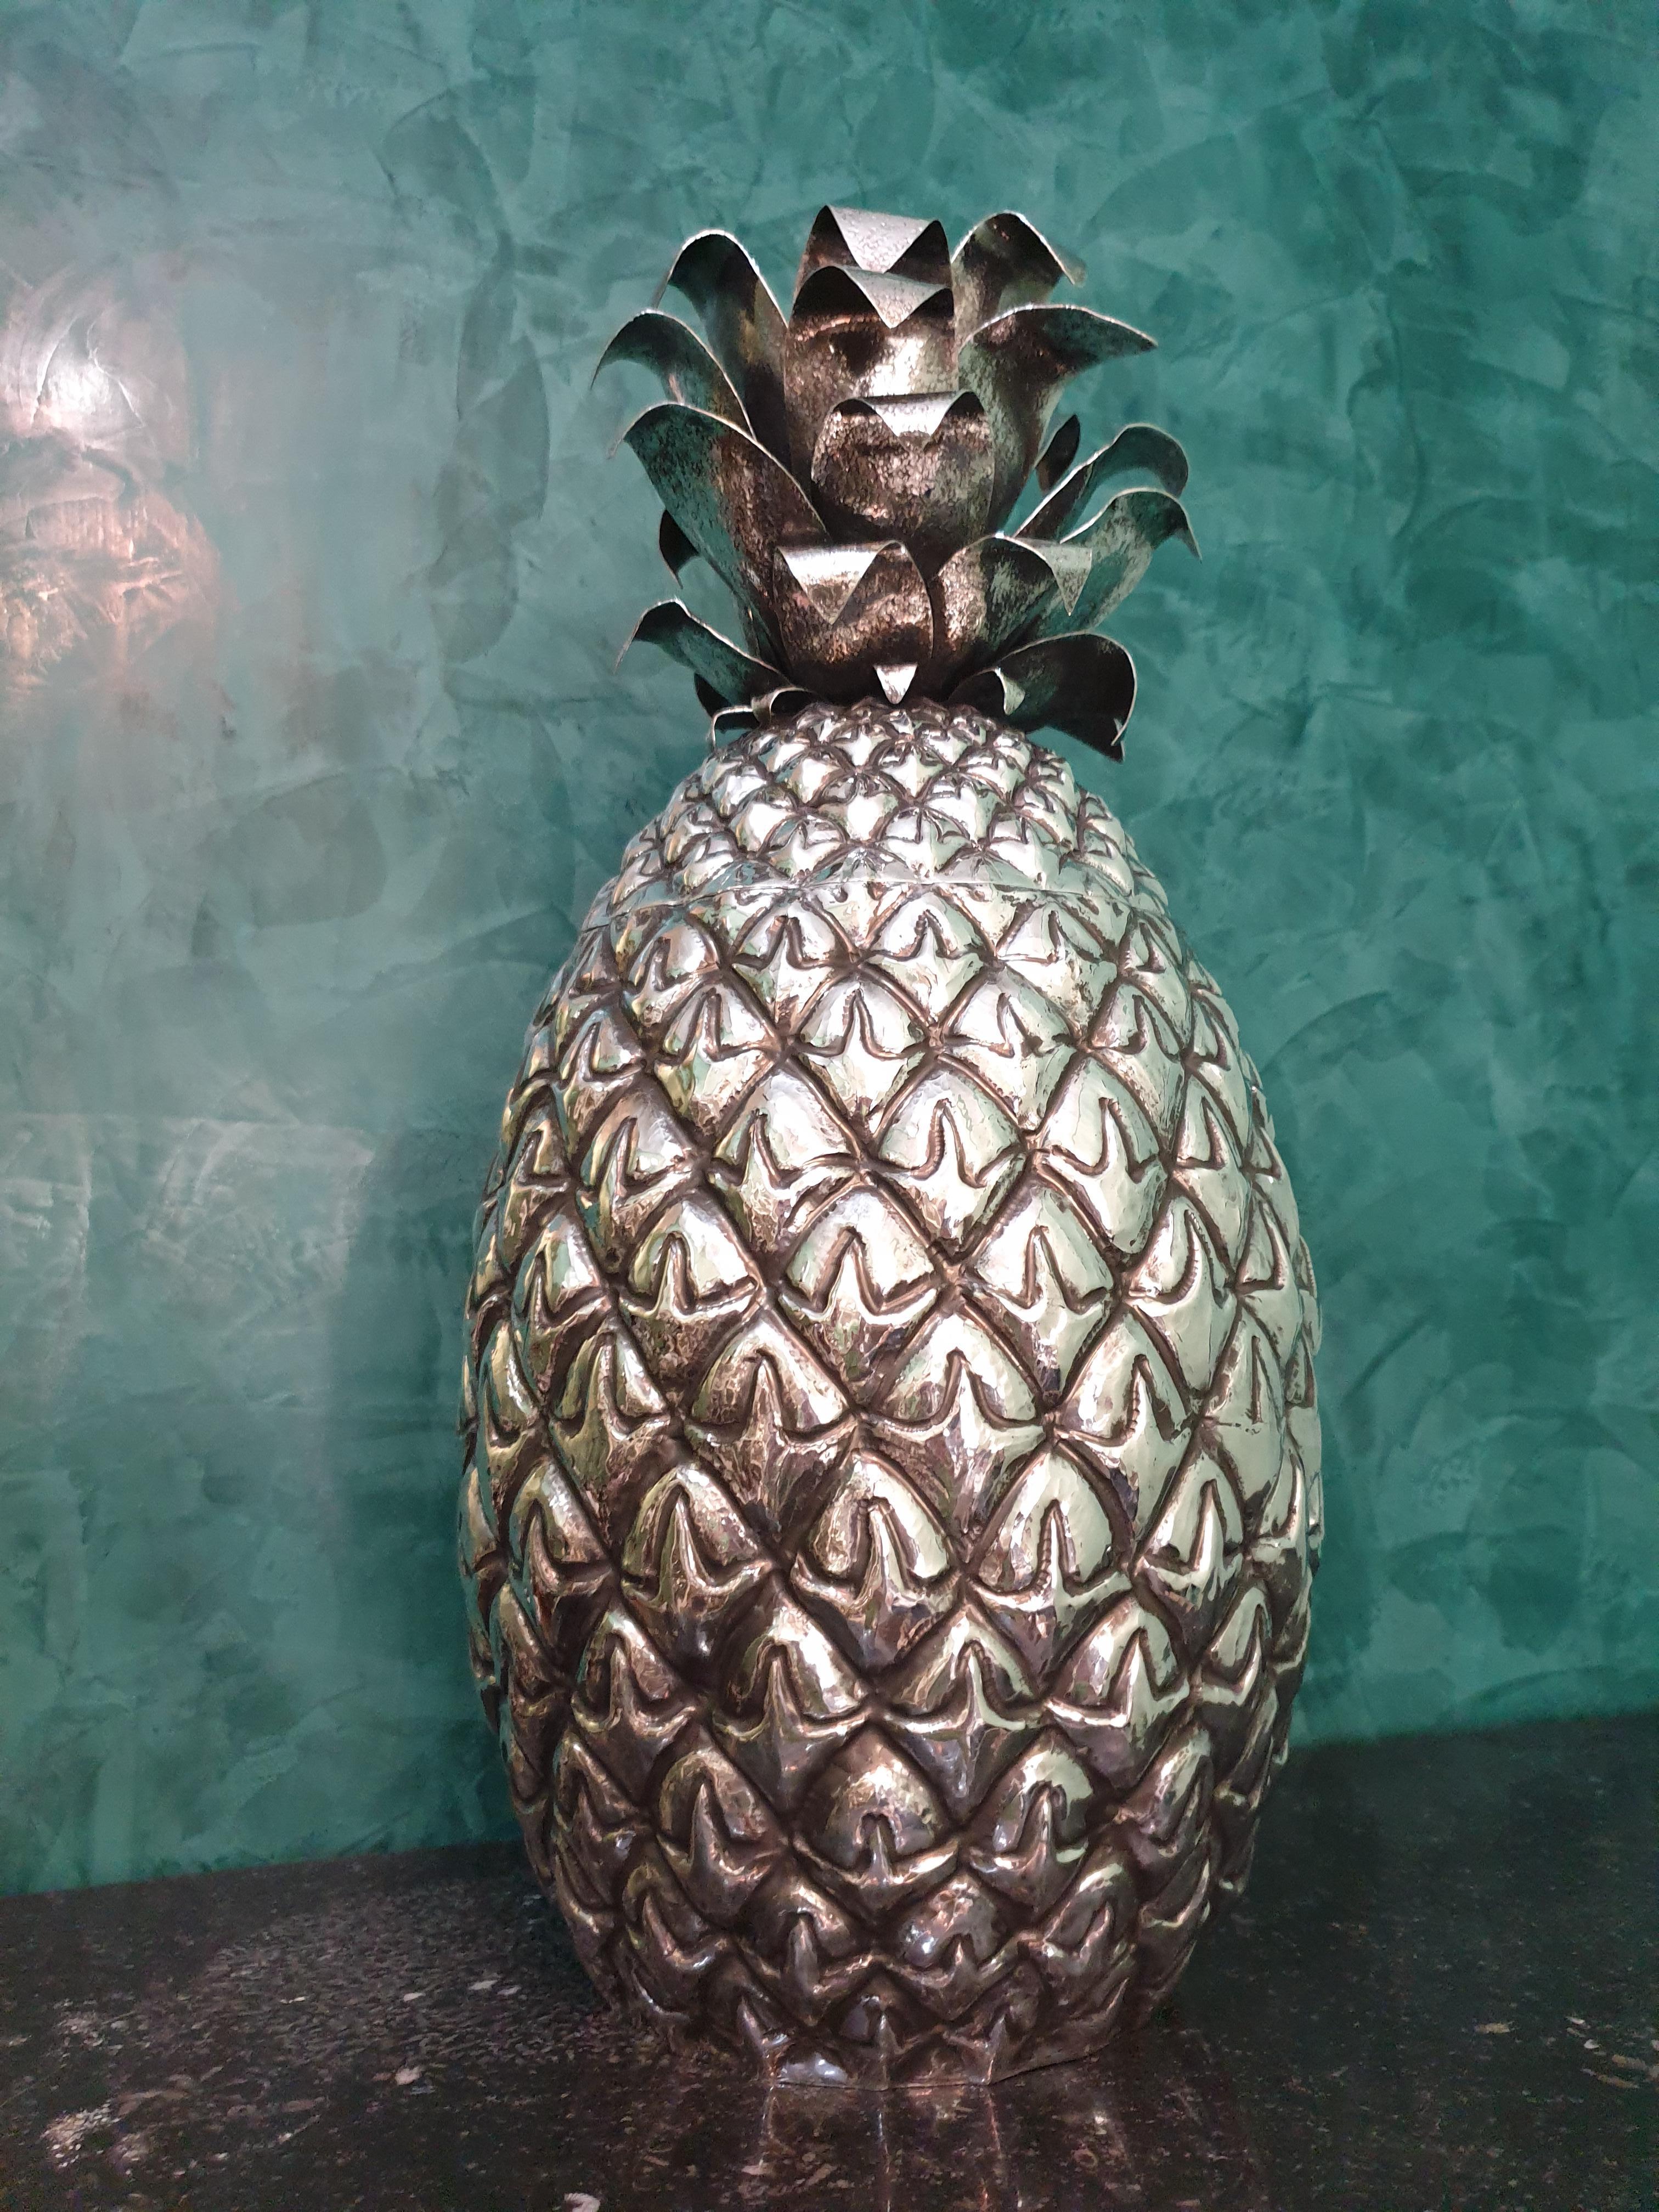 Italian 20th Century Silver Pineapple Vase Engraved by Hand Milan Italy, 1934-1944 For Sale